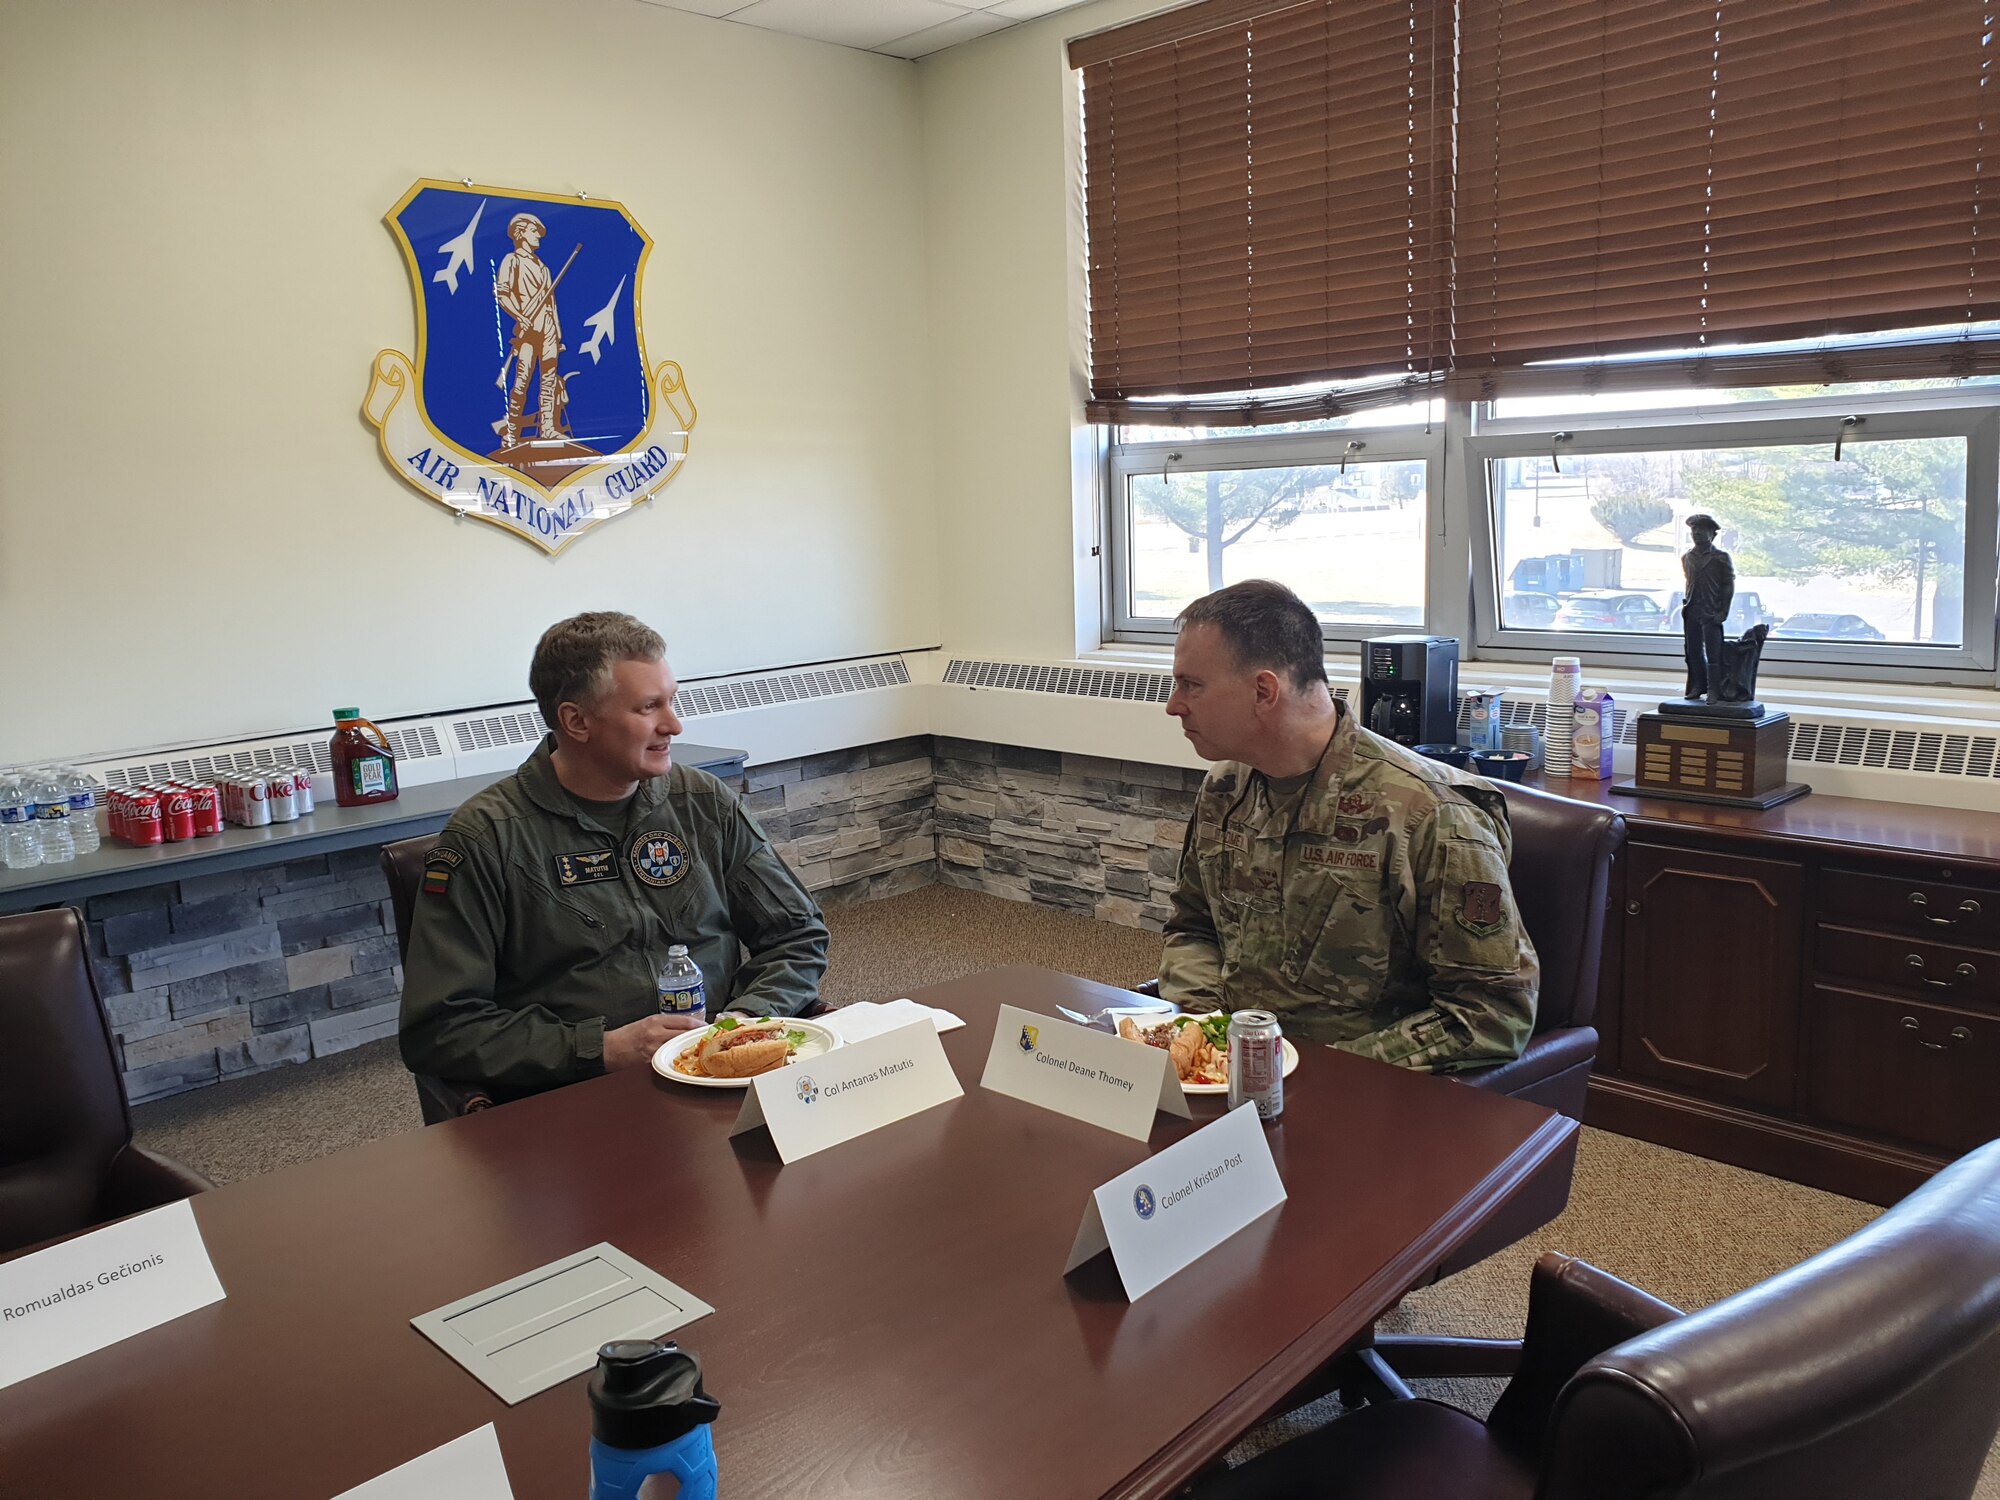 Two men in military uniforms sit at a table.